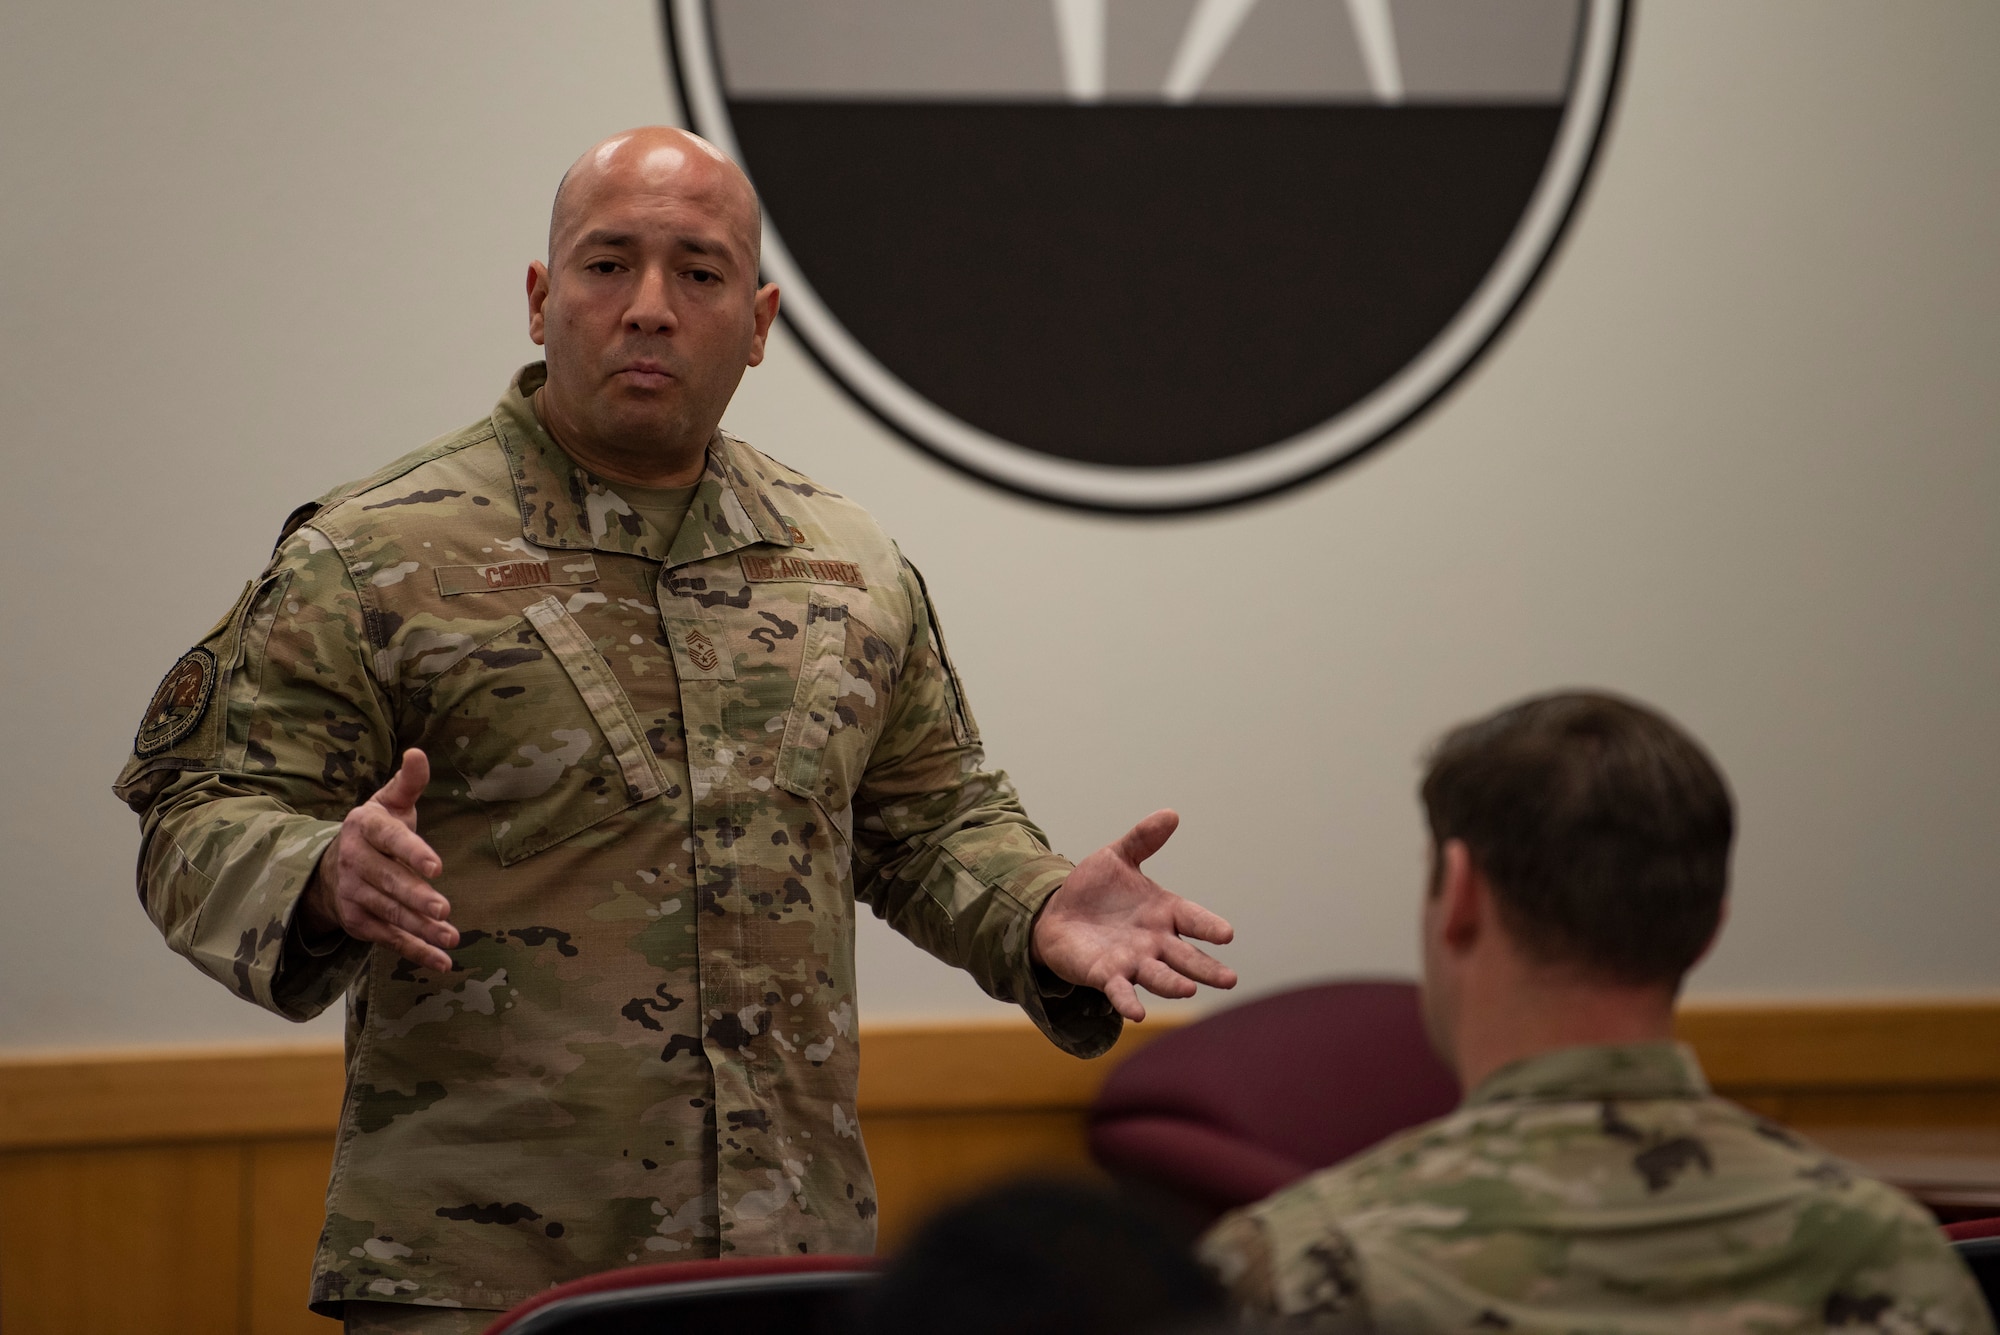 Chief Master Sgt. Steve Cenov, 8th AF command chief and J-GSOC senior enlisted leader, provides feedback to a group of NCOs and SNCOs during a professional development question & answer session at Dyess Air Force Base, Texas, Jan. 6, 2023. The 8th Air Force command team used the visit as an opportunity to discuss the importance of Striker Airmen and the role they play in support of strategic deterrence and the global strike mission.  (U.S. Air Force photo by Airman 1st Class Ryan Hayman)